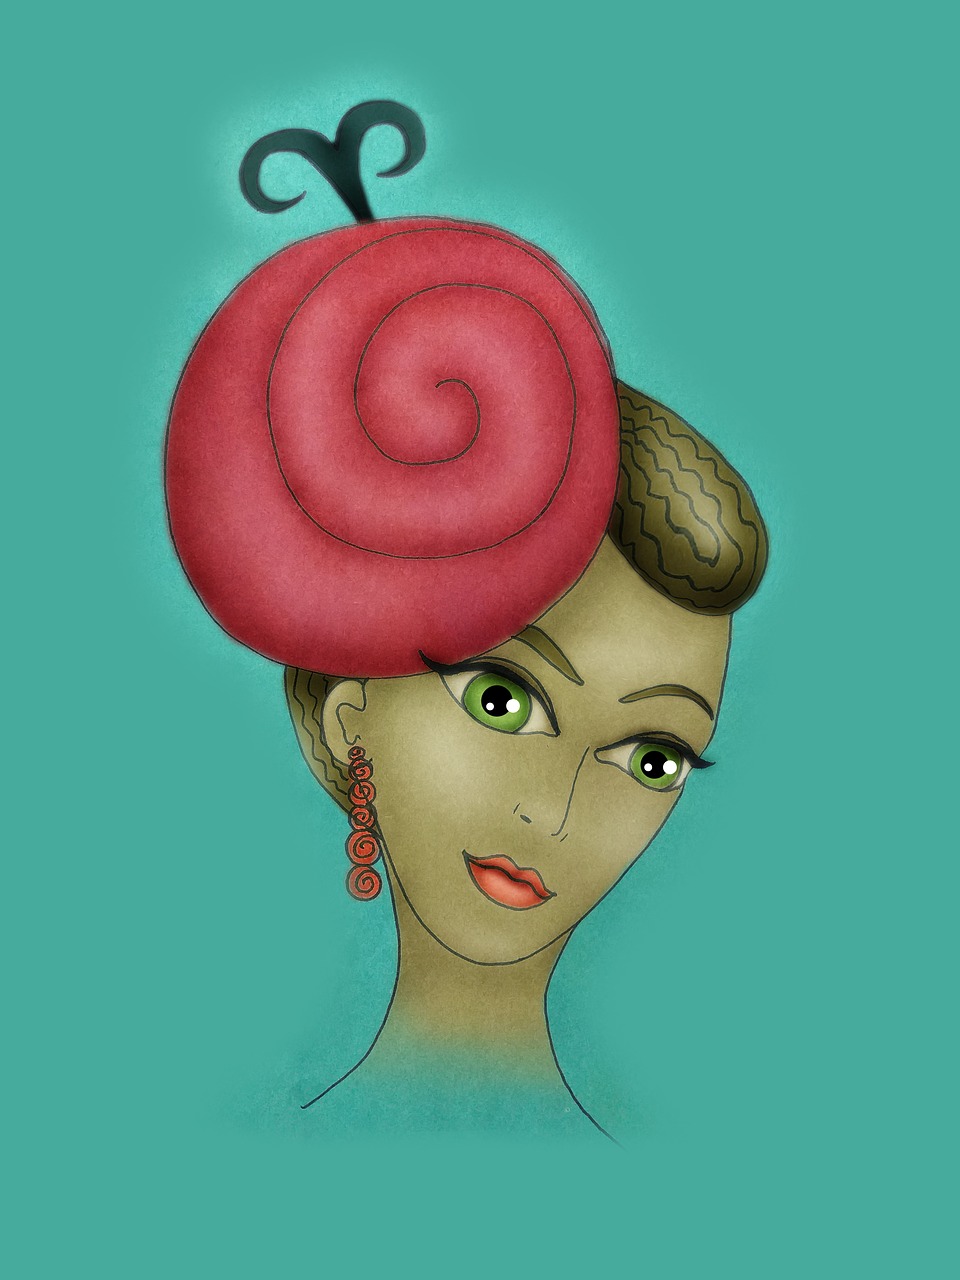 a drawing of a woman wearing a red hat, a digital painting, inspired by Kahlo, behance contest winner, pop surrealism, in the shape of a cinnamon roll, turquoise pink and green, an apple, elegant art nouveau style